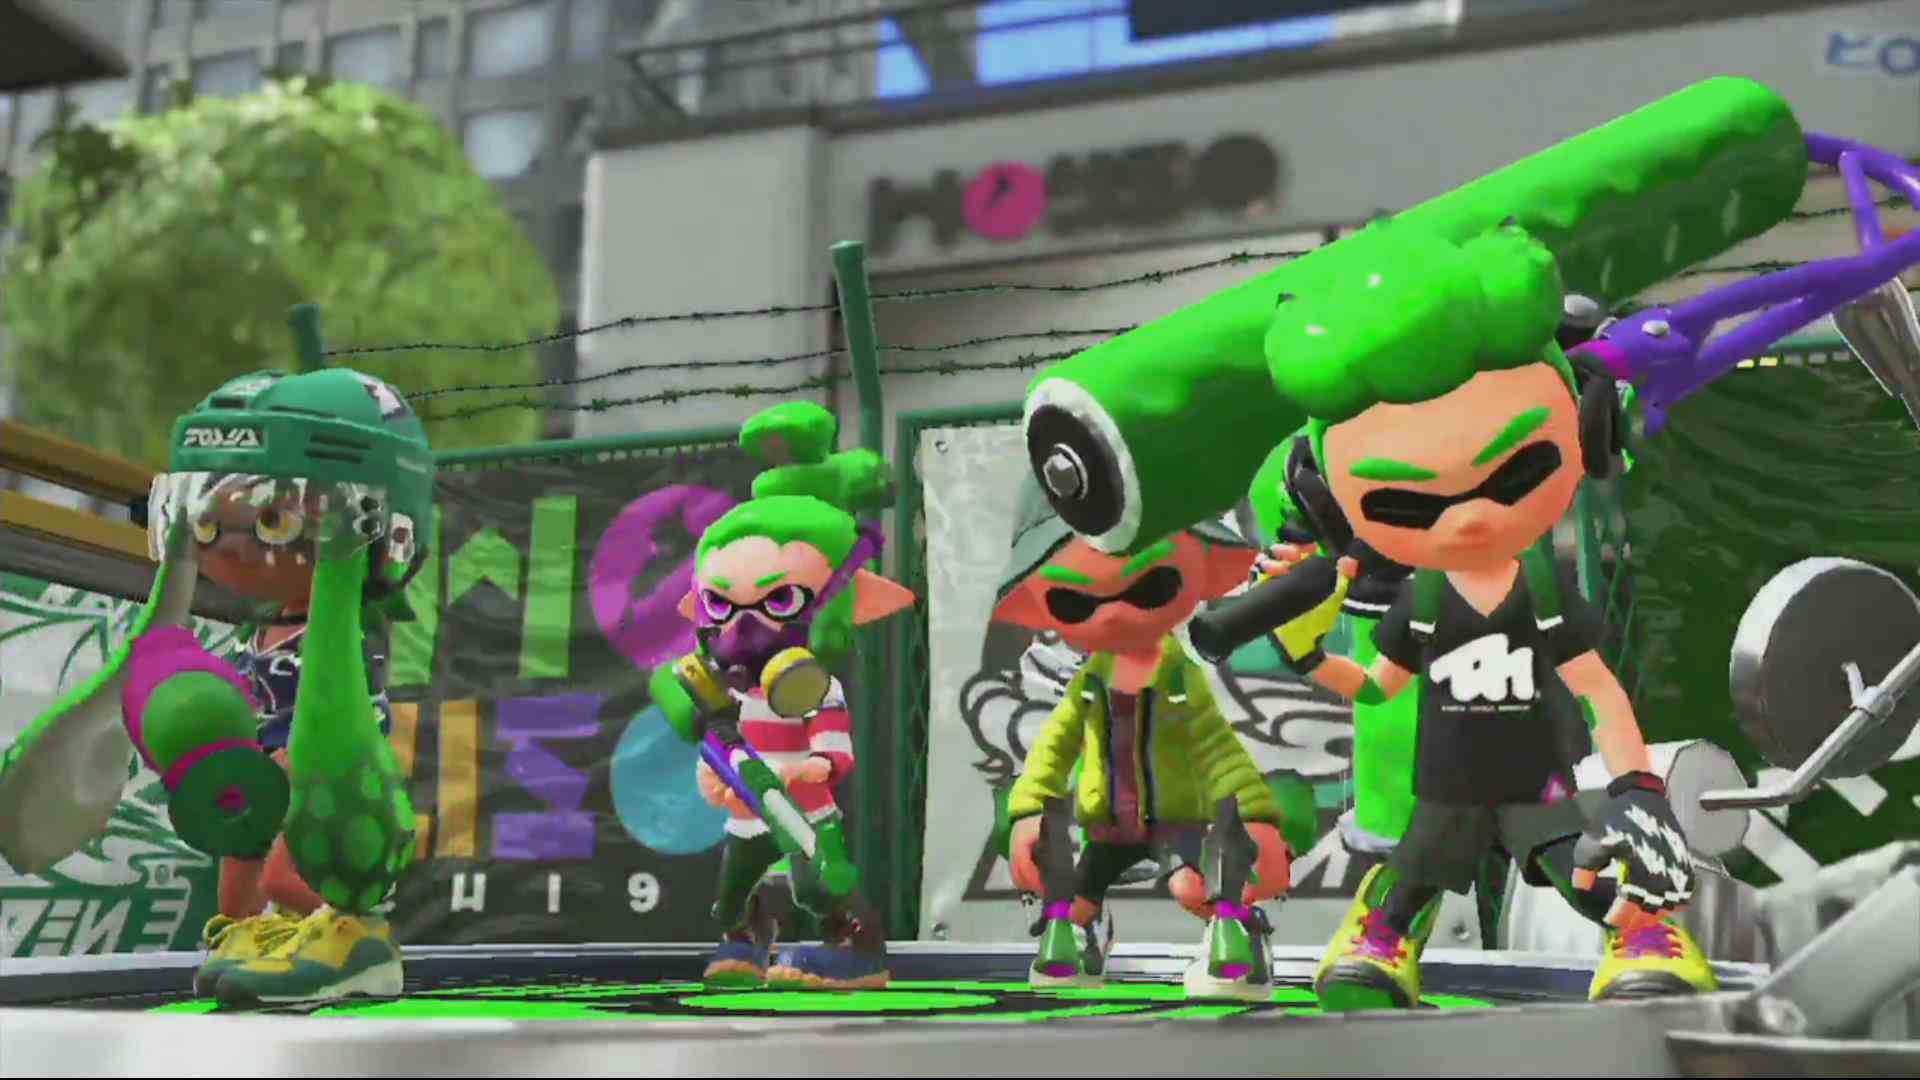 New trademarks filed for Splatoon 2 and SSBU